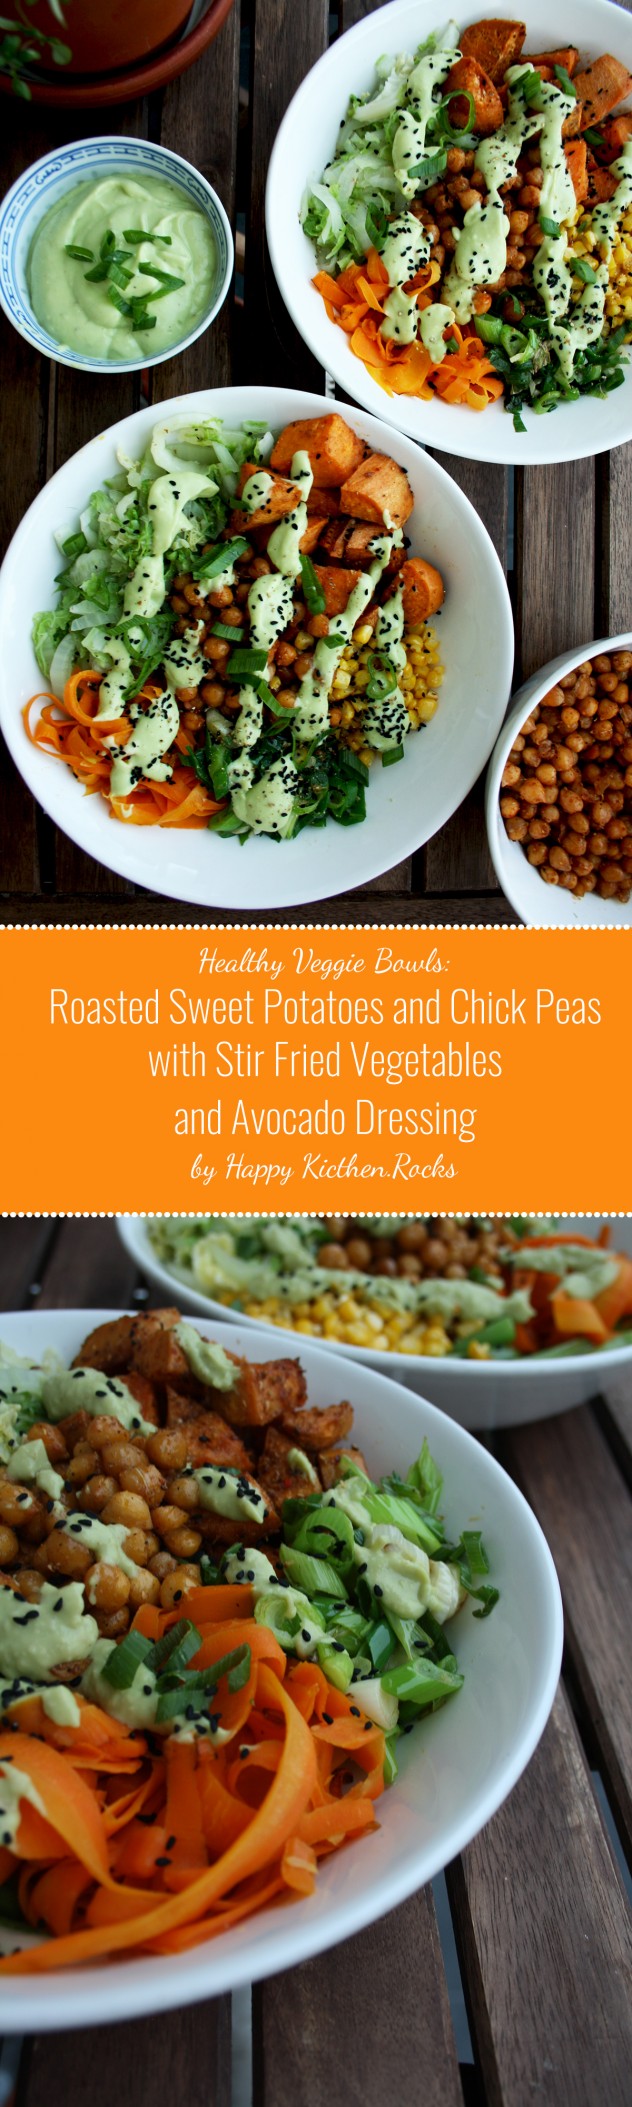 Healthy Veggie Bowls: Roasted Sweet Potatoes and Chick Peas with Stir Fried Napa Cabbage, Corn, Carrots and Scallions with Avocado Dressing. The yummiest and the healthiest veggie bowls. Great make ahead meal. Make your own with vegetables of your choice!